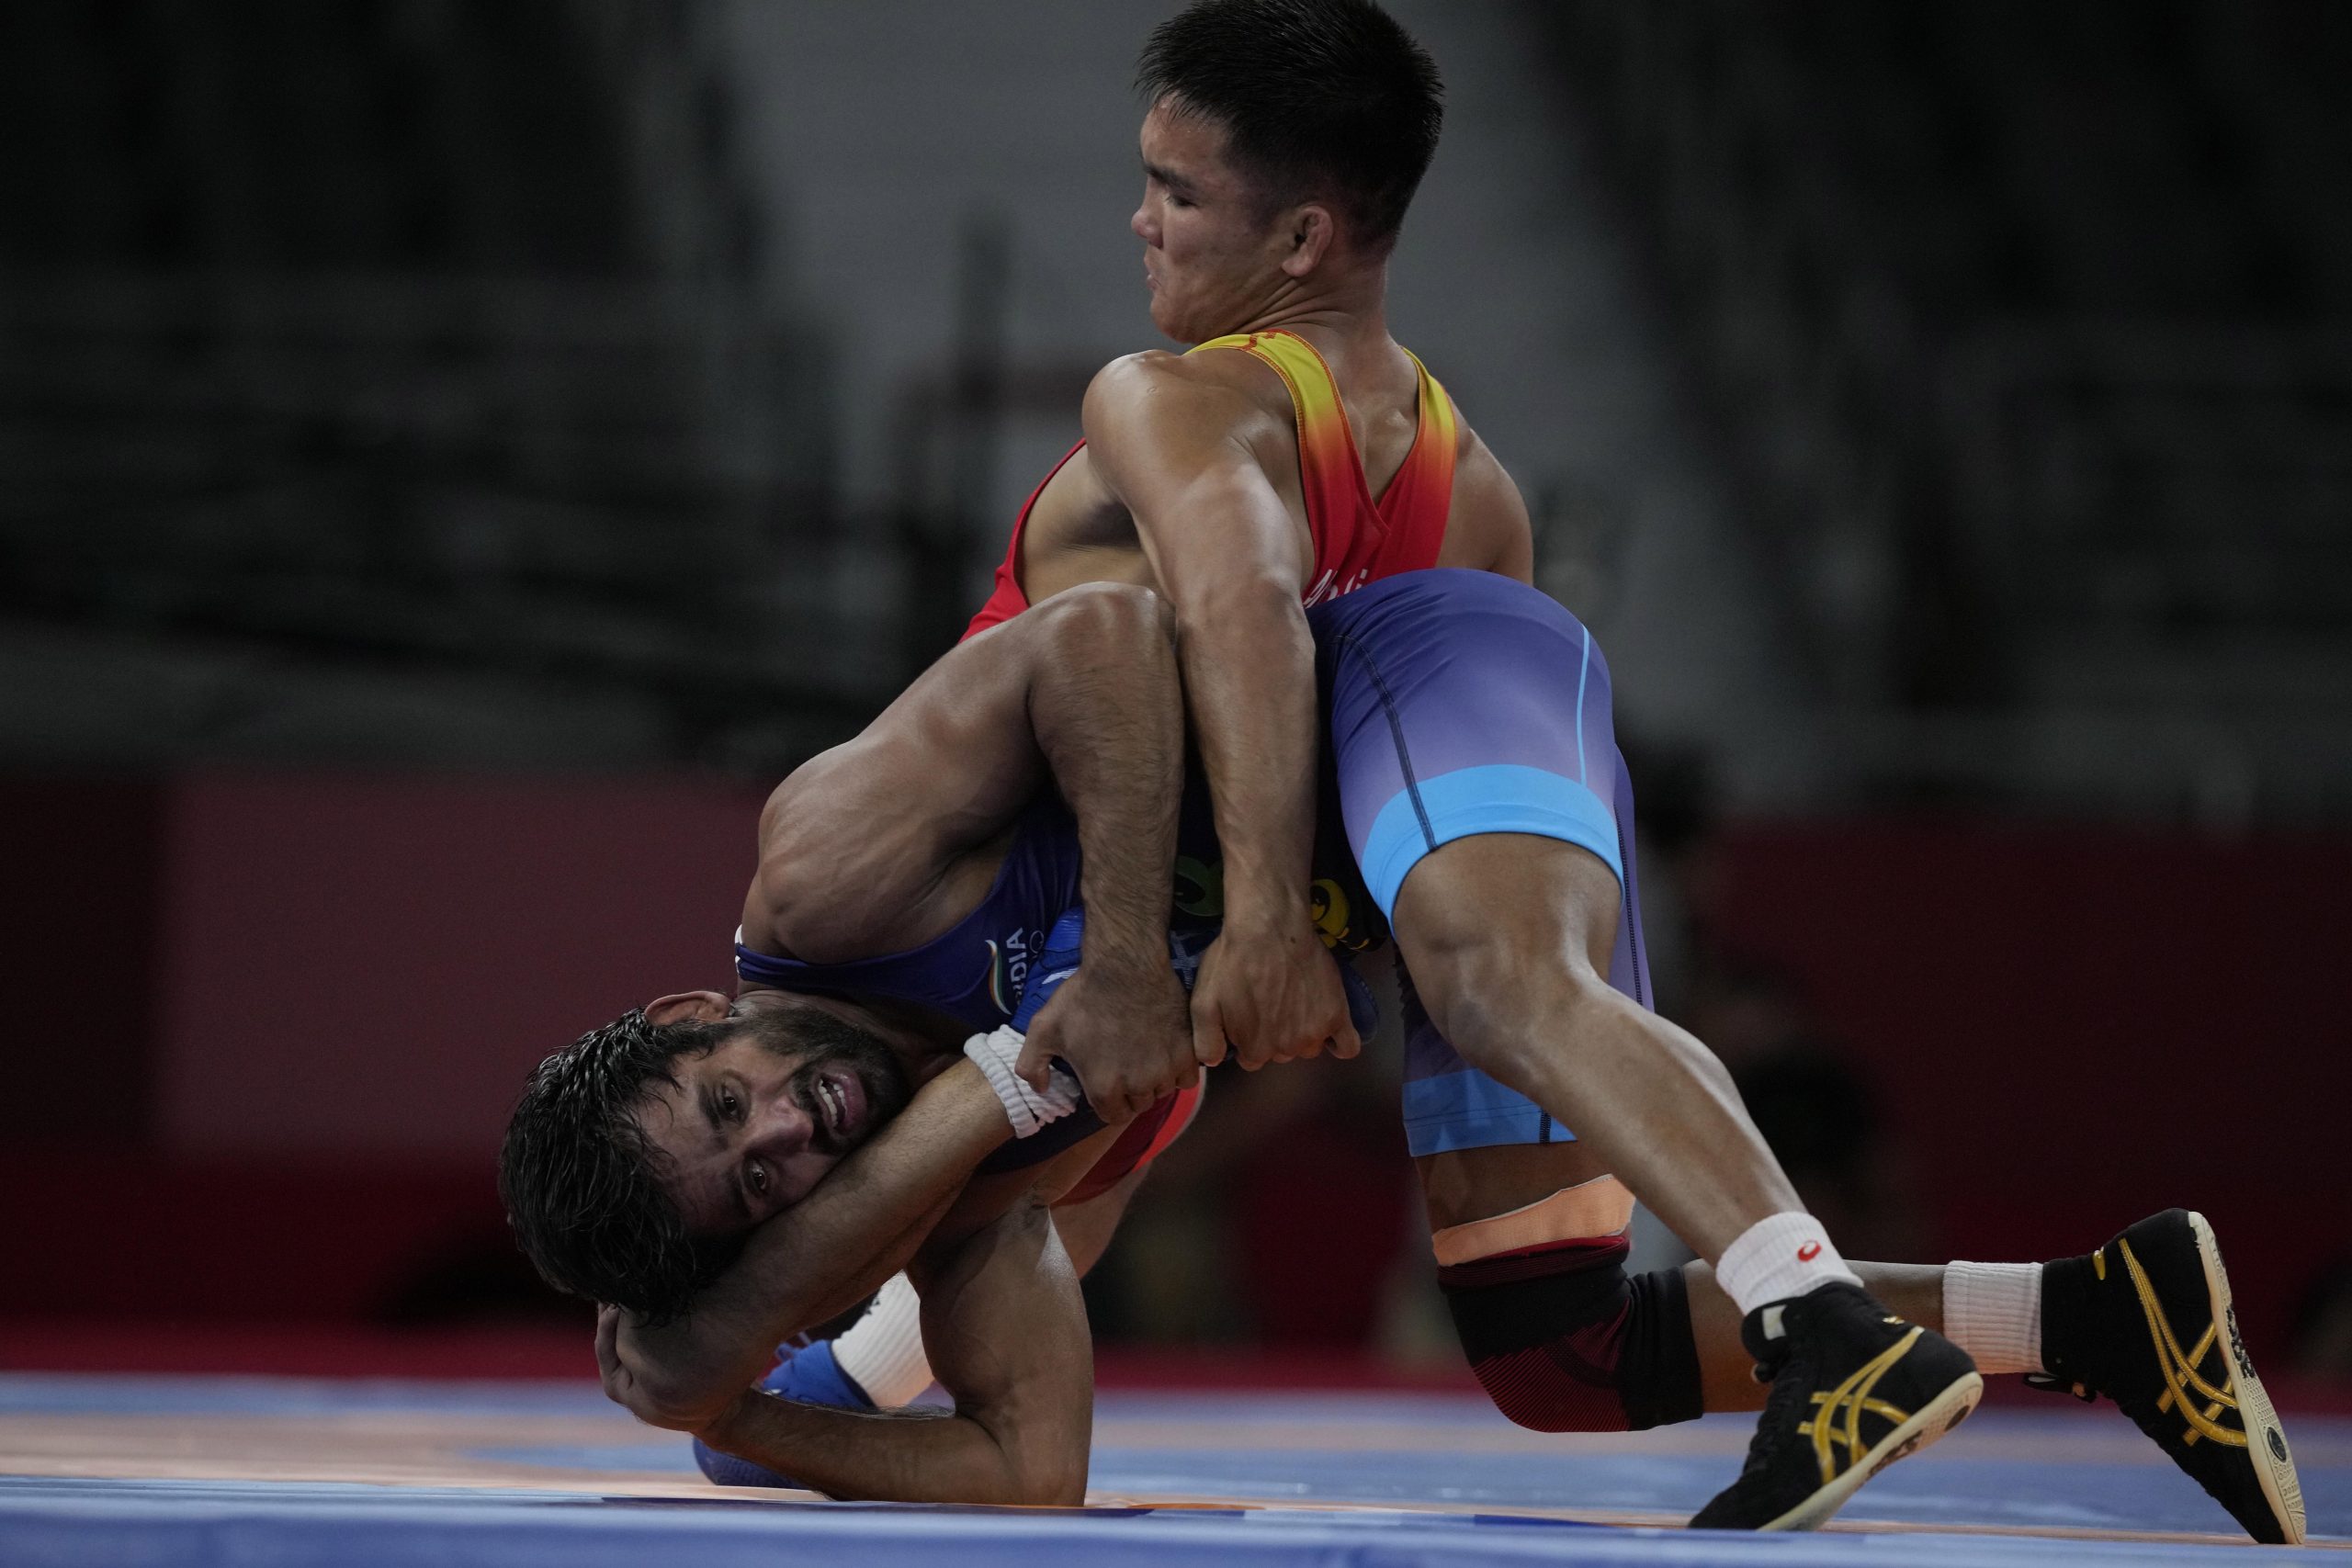 How many medals has Indian wrestler Bajrang Punia won?